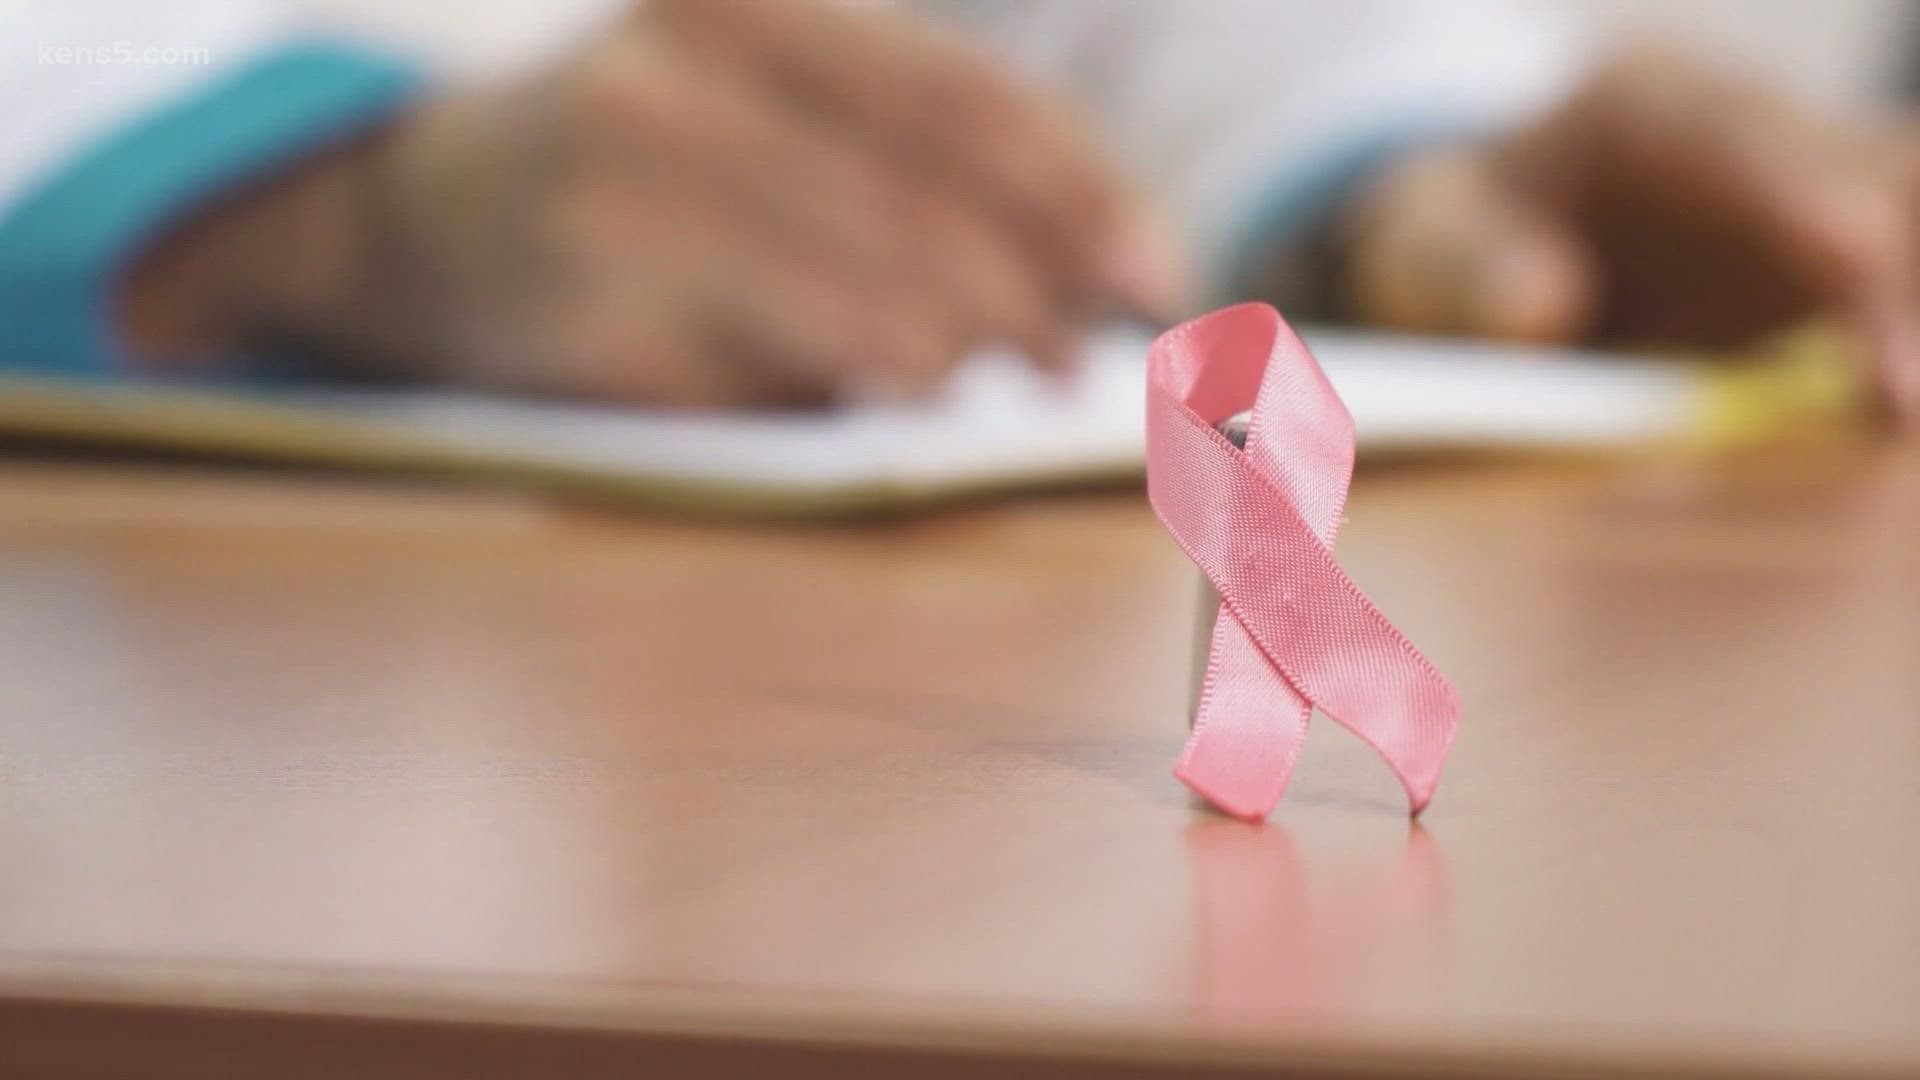 Health care workers share the multiple ways women can reduce their risk for breast cancer.